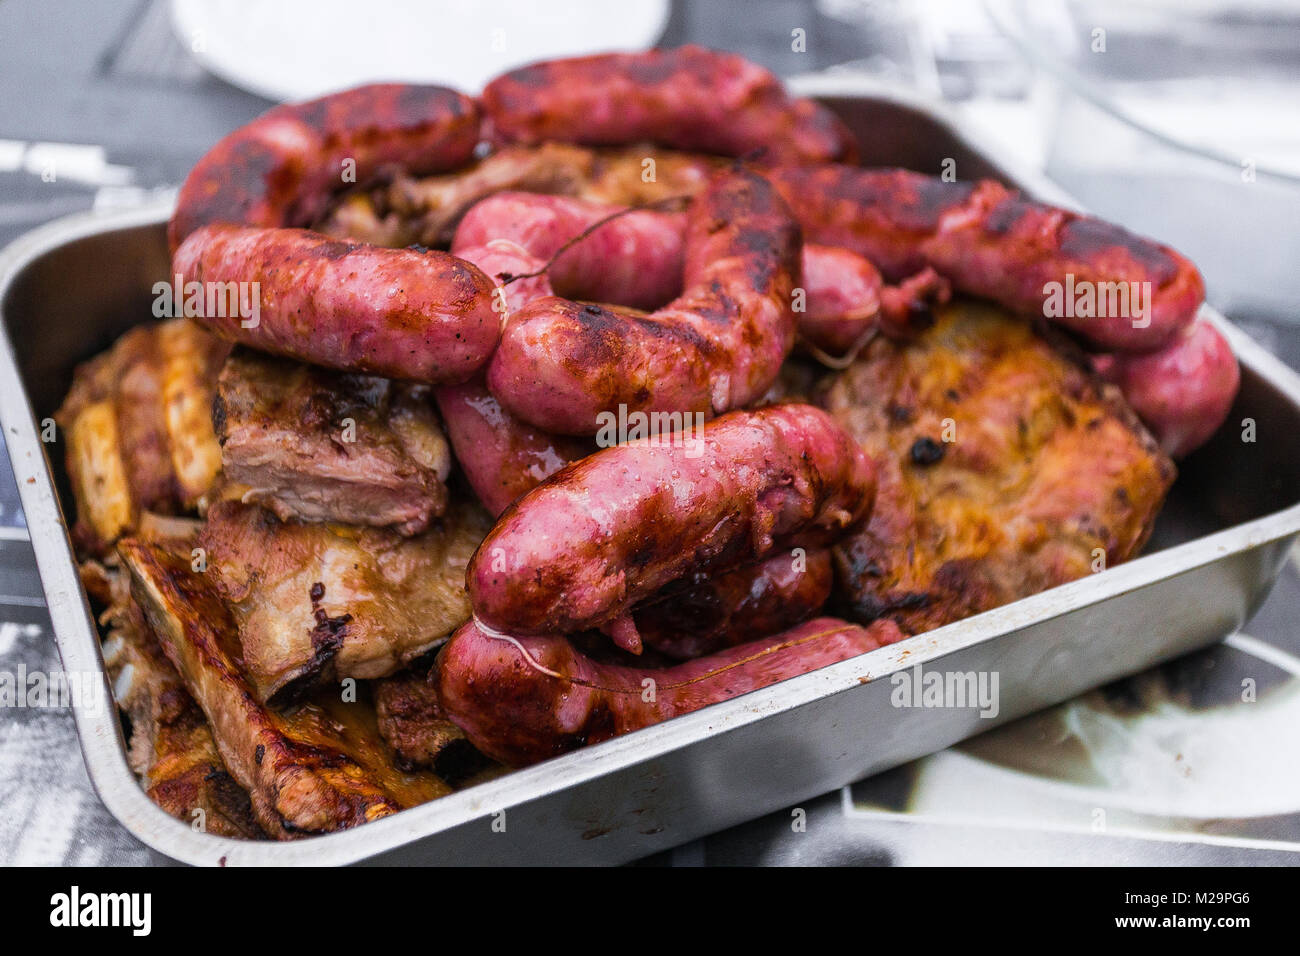 Churrasco de cerdo (chargrilled pork meat), a delicious way to start the day during the summer in Galicia, Spain Stock Photo